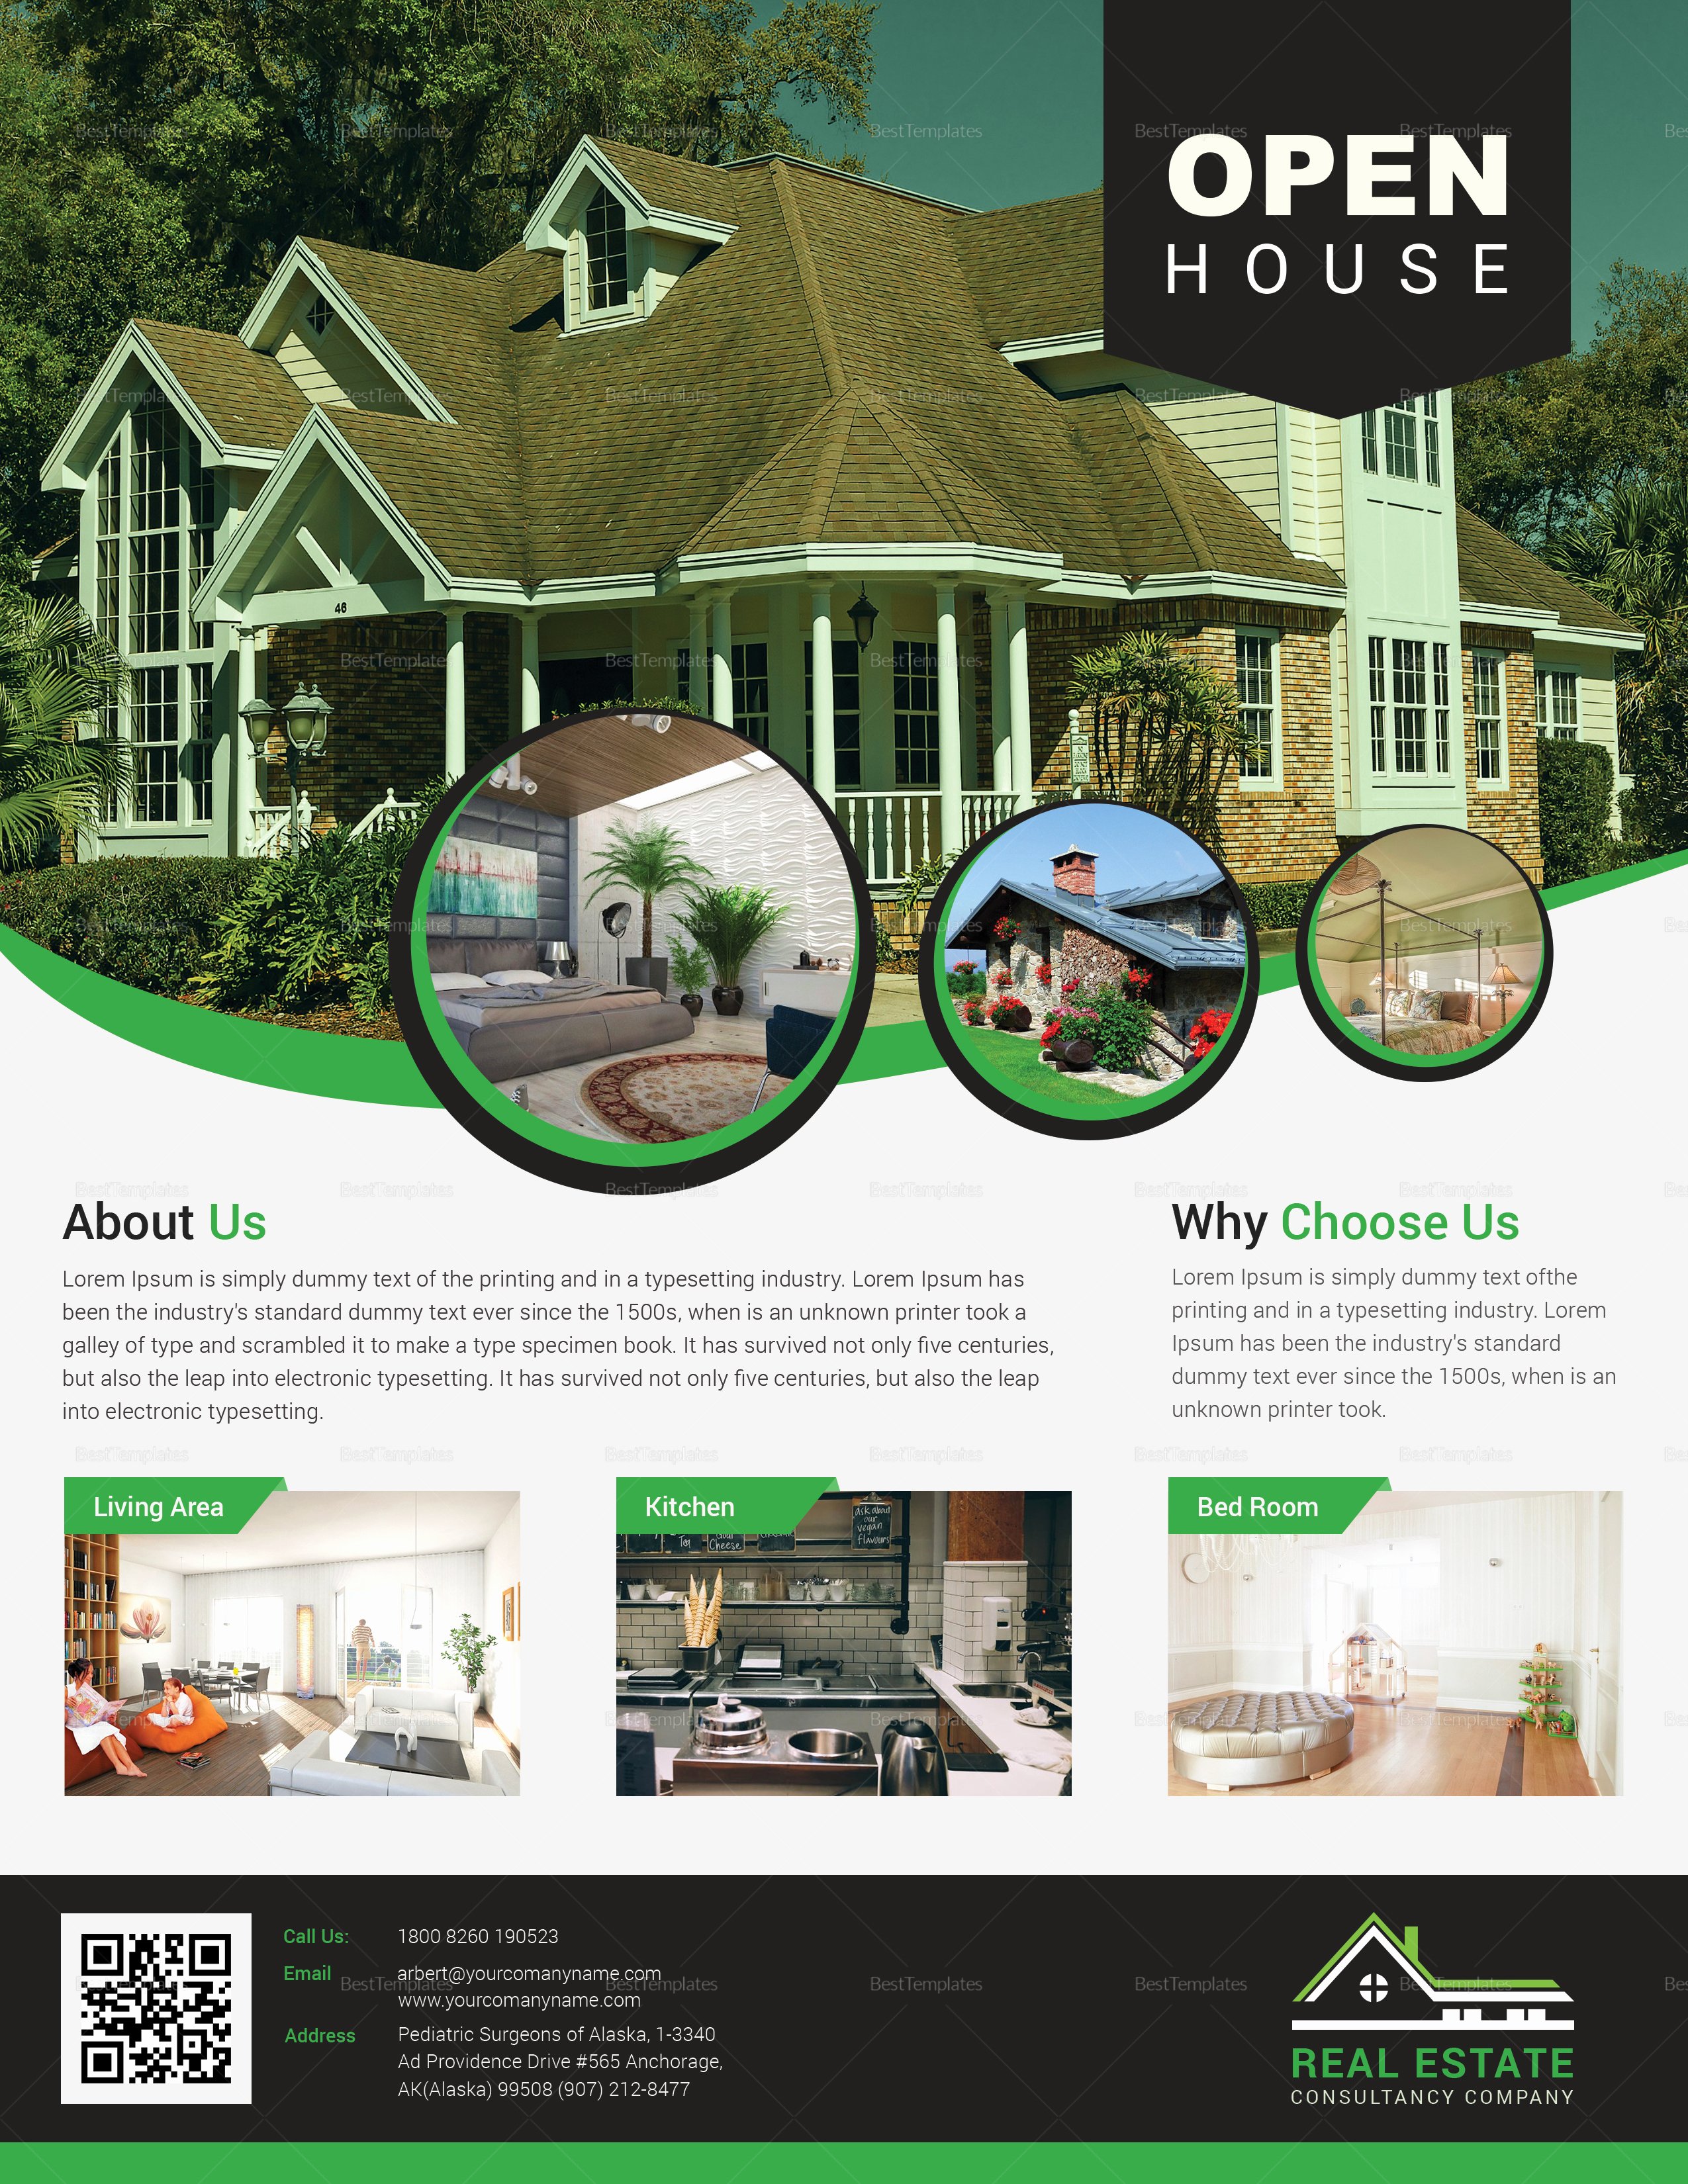 Open House Flyer Template Publisher Inspirational Real Estate Open House Flyer Design Template In Word Psd